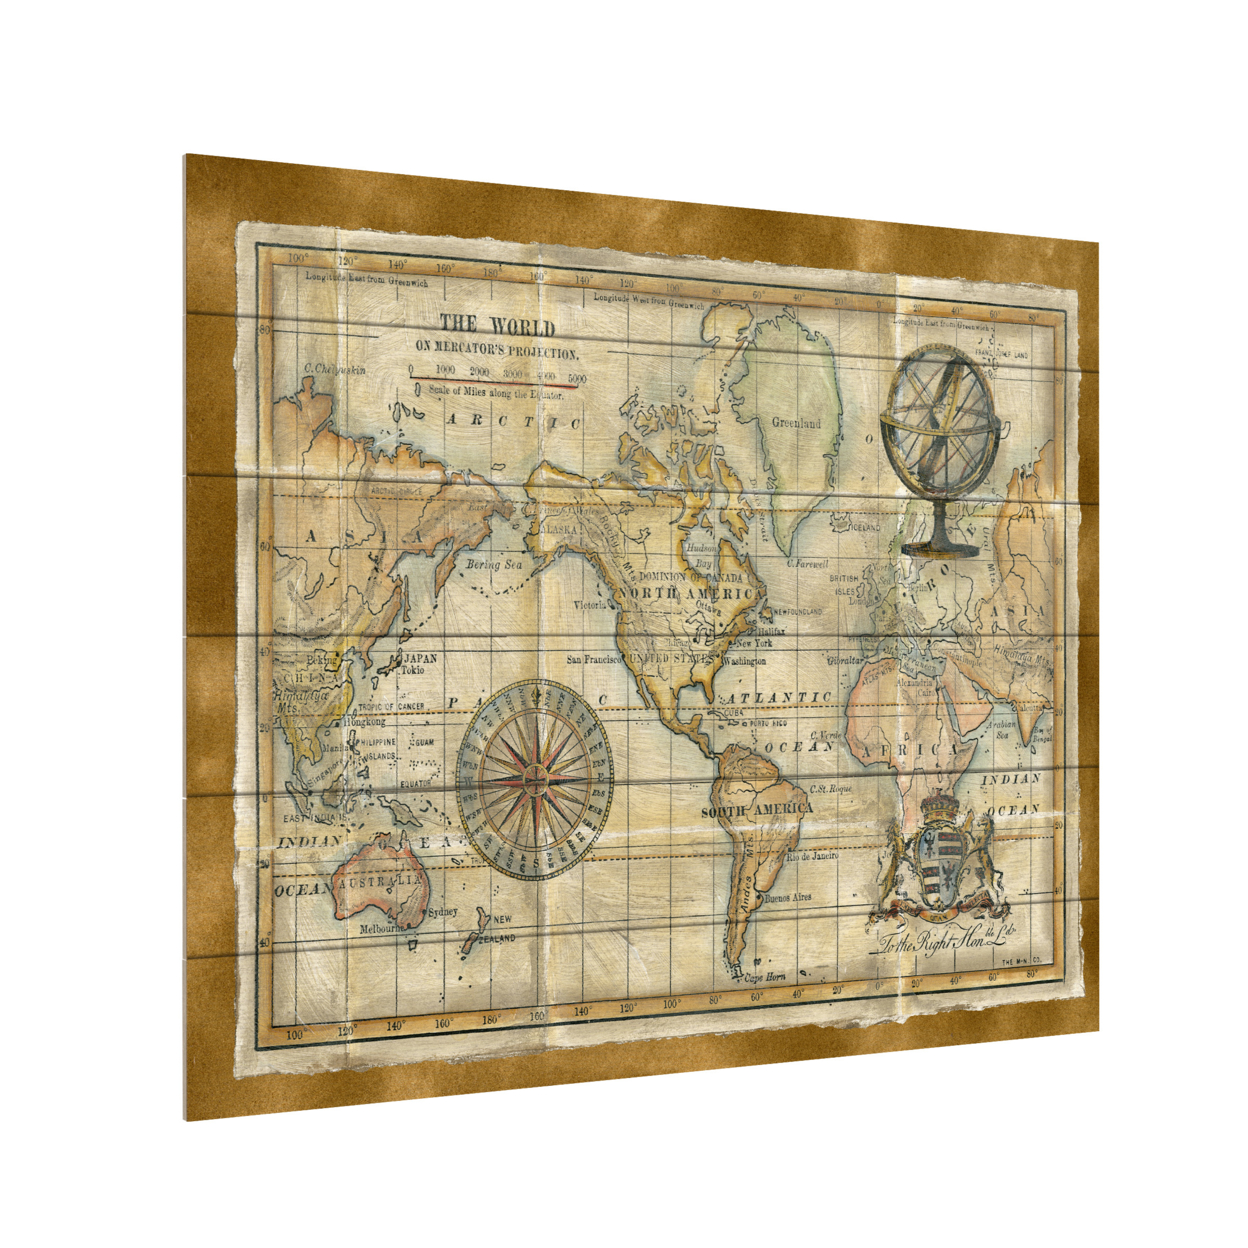 Wooden Slat Art 18 X 22 Inches Titled Antique World Map Framed Ready To Hang Home Decor Picture